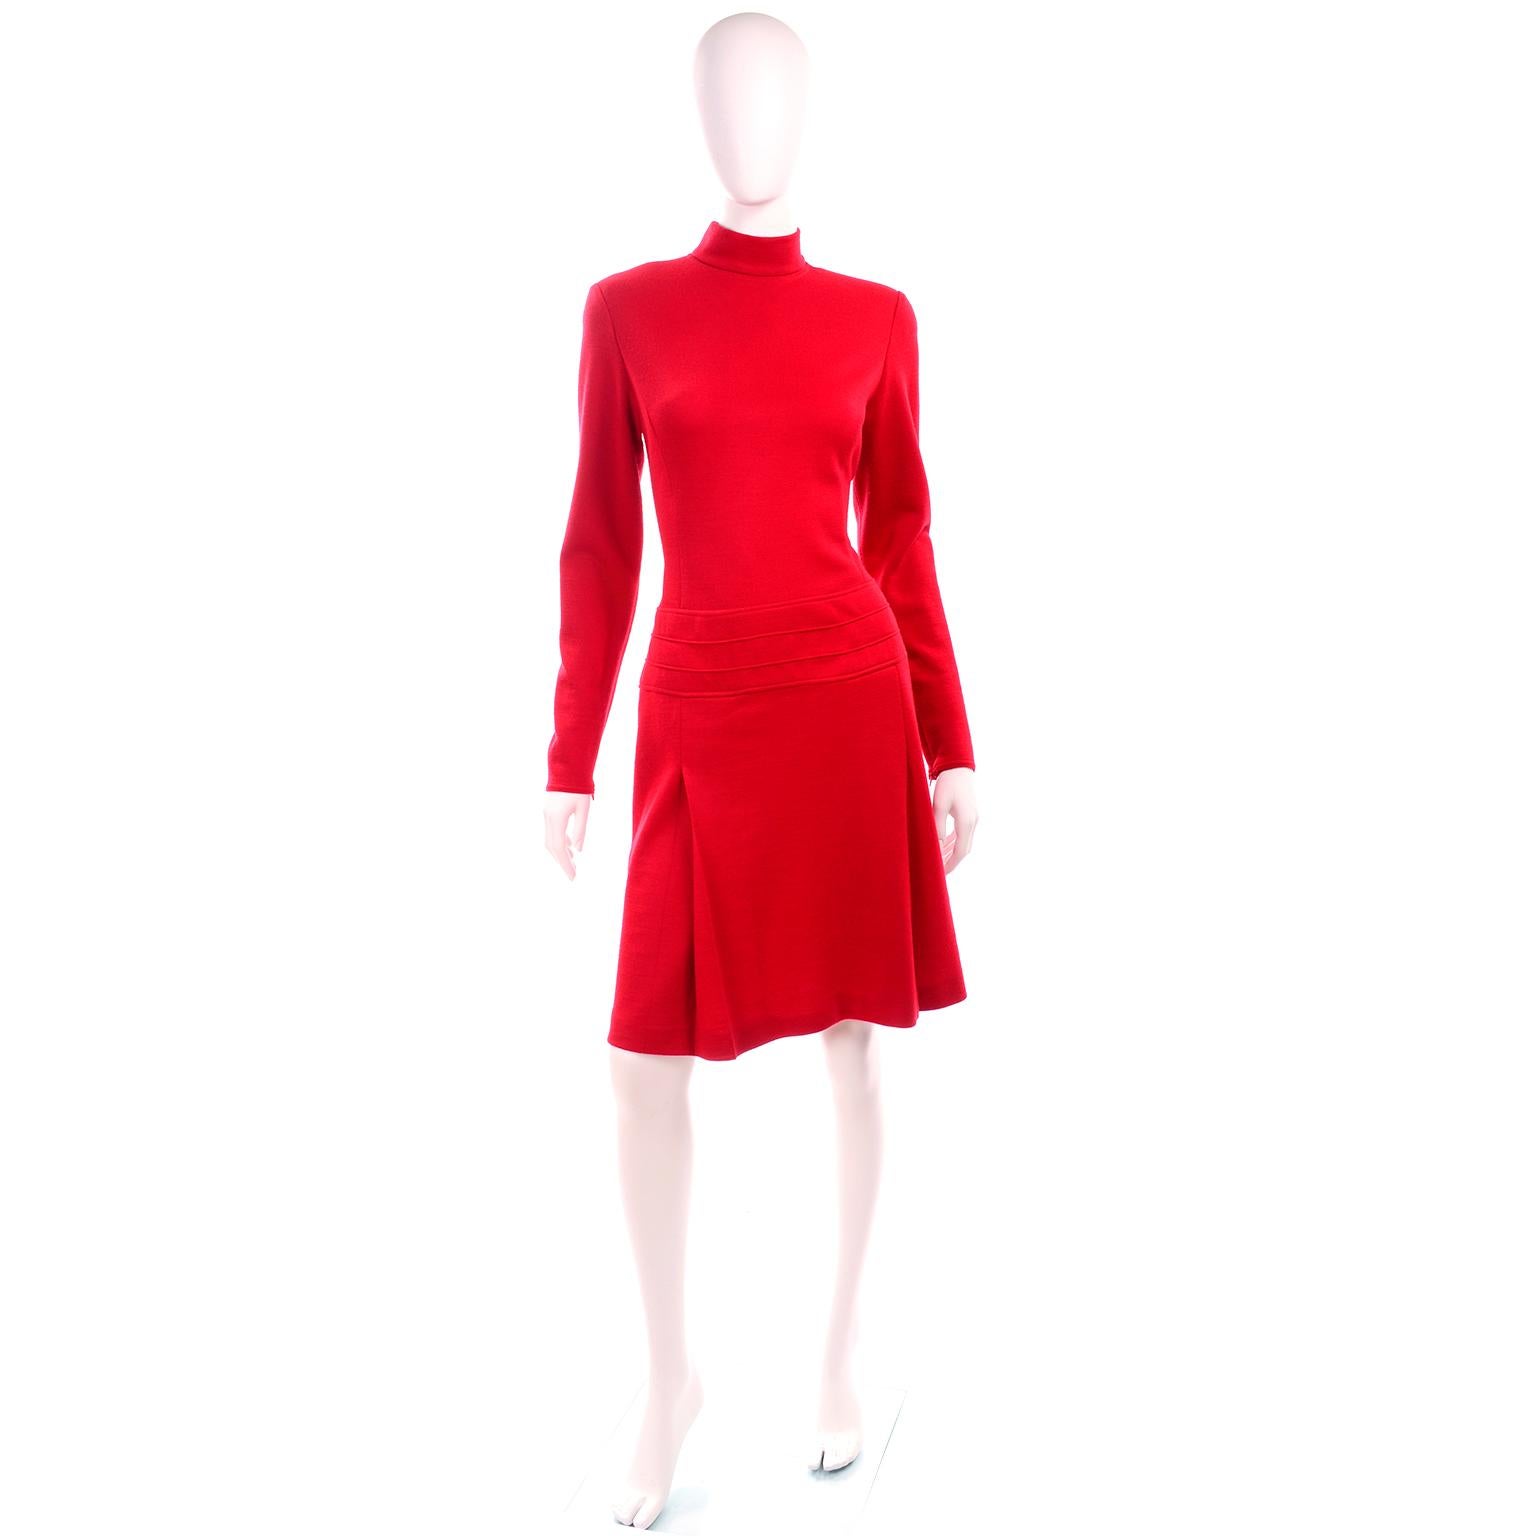 This is a vintage 1990's State of Claude Montana cherry red wool blend knit day dress with a mock t neck, inverted pleated skirt, and structured seam details at the drop waistline. This easy to wear dress has long sleeves with metal zippers at the